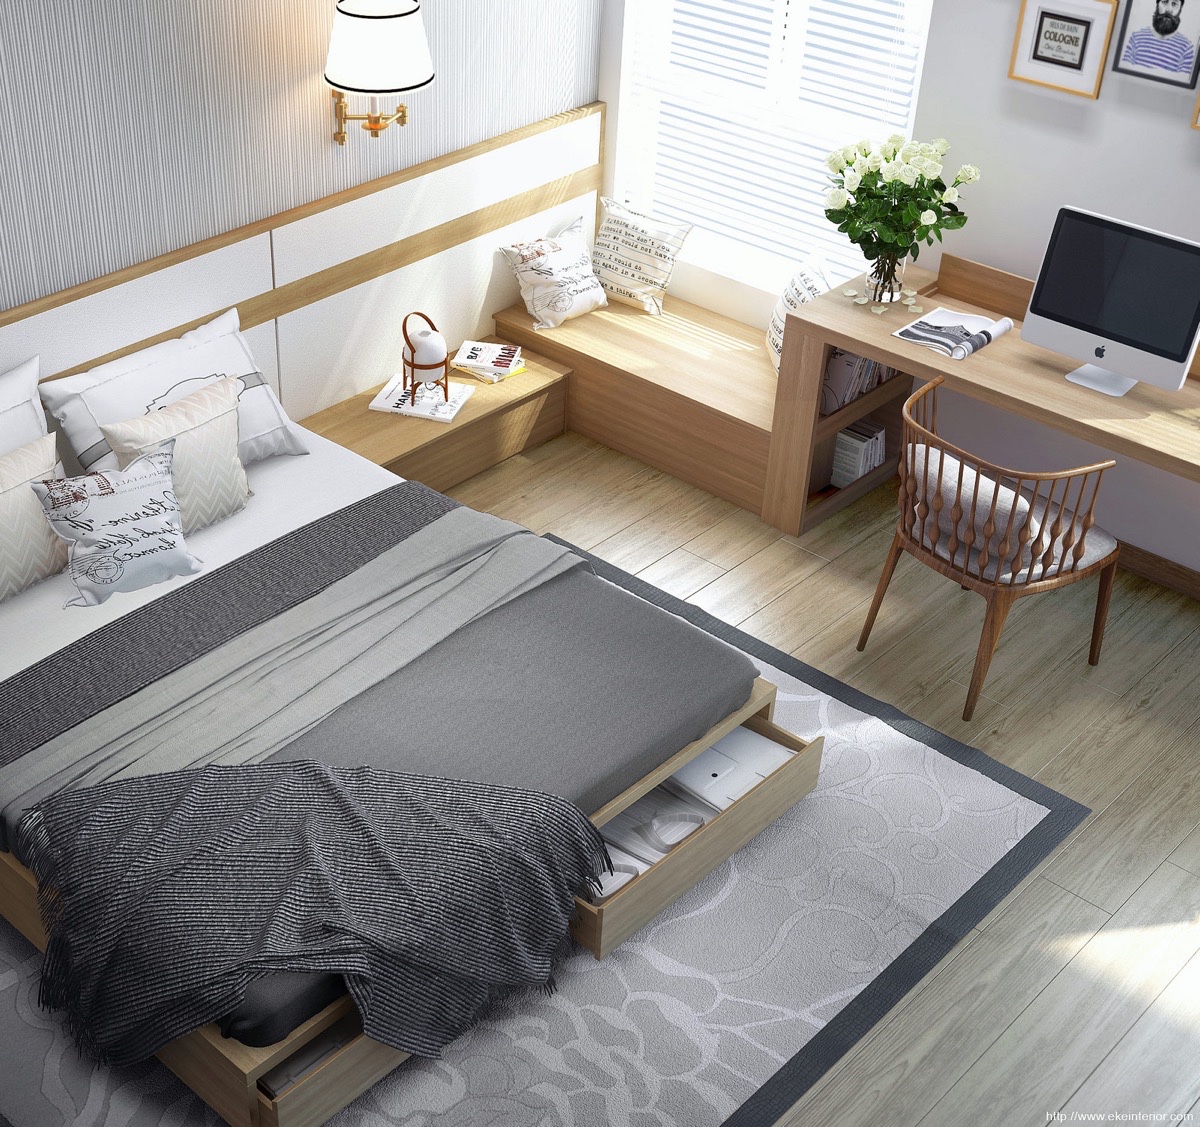 Multi-purpose furniture in a simple bedroom "width =" 1200 "height =" 1127 "srcset =" https://mileray.com/wp-content/uploads/2017/03/multipurpose-furniture-in-simple-bedroom -Eke-Interior. jpg 1200w, https://mileray.com/wp-content/uploads/2017/03/multipurpose-furniture-in-simple-bedroom-Eke-Interior-300x282.jpg 300w, https: // myfashionos .com / wp- content / uploads / 2017/03 / Multipurpose furniture-in-simple-bedroom-Eke-Interior-768x721.jpg 768w, https://mileray.com/wp-content/uploads/2017/03/ Multipurpose furniture-in-simple-bedroom -Eke-Interior-1024x962.jpg 1024w, https://mileray.com/wp-content/uploads/2017/03/multipurpose-furniture-in-simple-bedroom-Eke-Interior -696x654.jpg 696w, https: / /mileray.com/wp-content/uploads/2017/03/multipurpose-furniture-in-simple-bedroom-Eke-Interior-1068x1003.jpg 1068w, https://mileray.com / wp-content / uploads / 2017 / 03 / multipurpose-furniture-in-simple-bedroom-Eke-Interior-447x420.jpg 447w "sizes =" (maximum width: 1200px) 100vw, 1200px